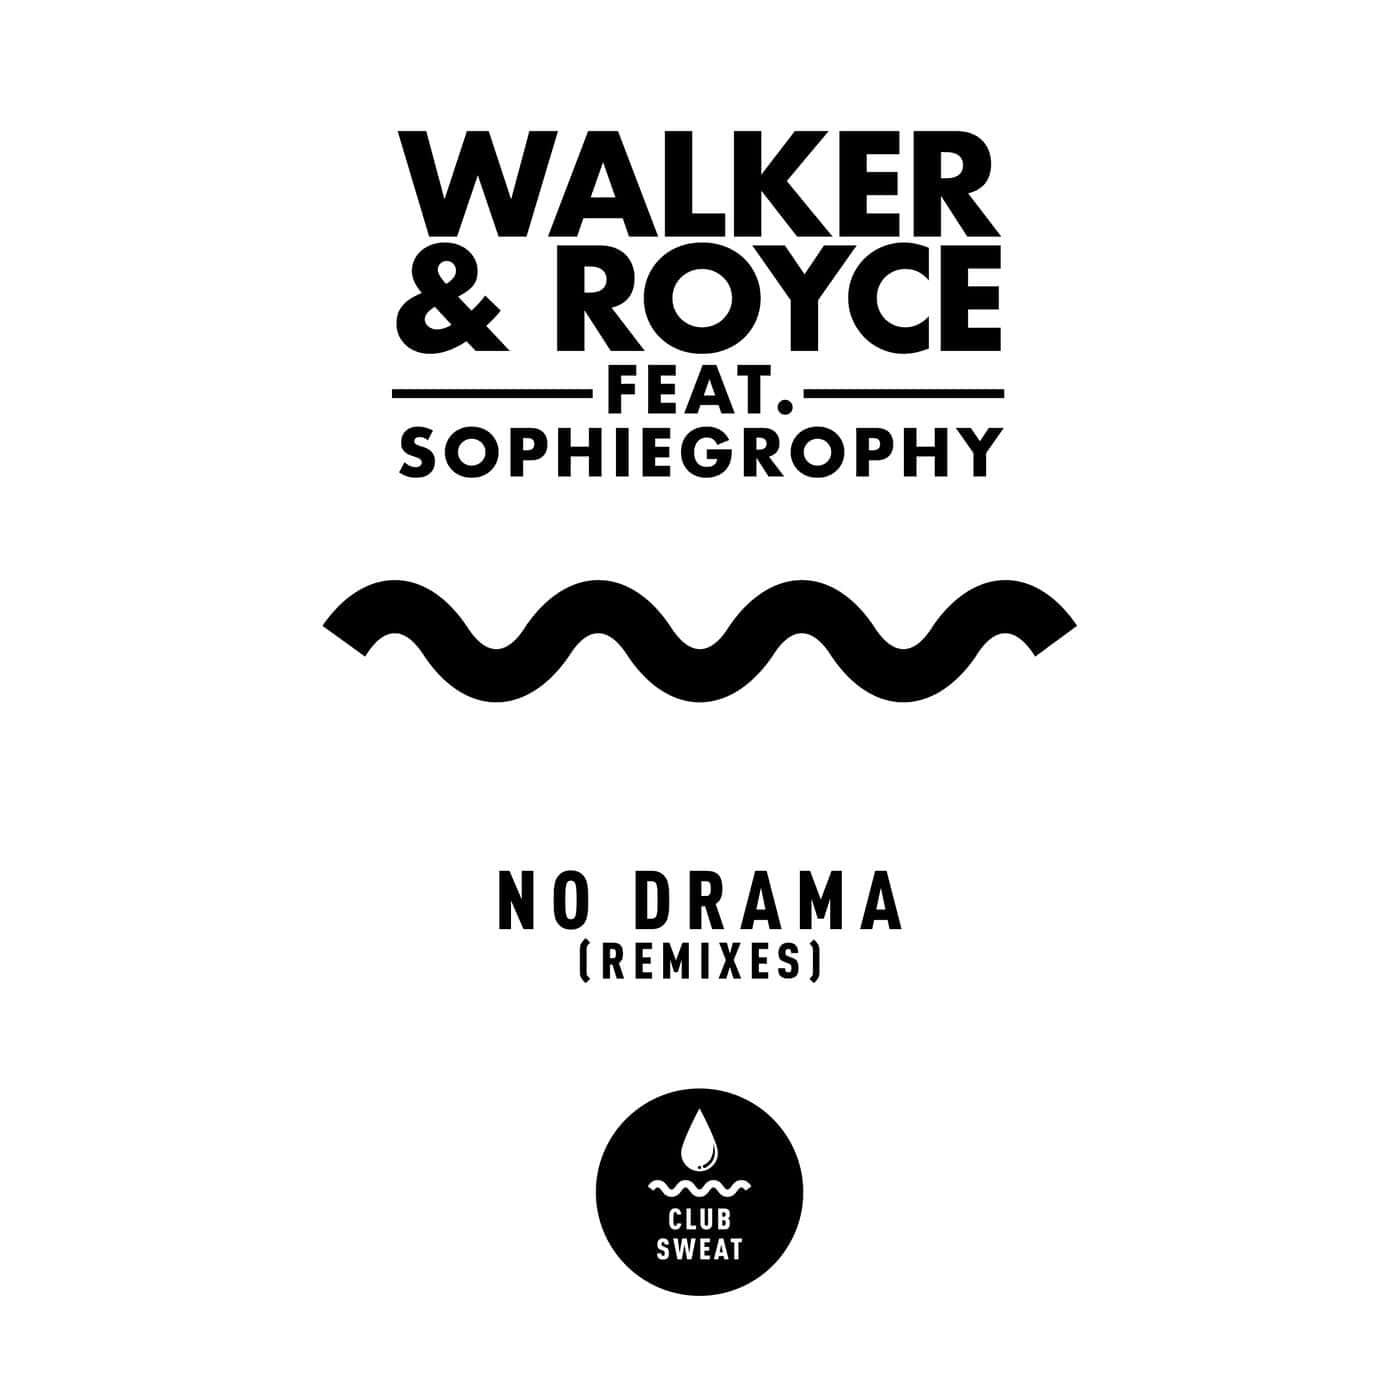 Download Walker & Royce, Sophiegrophy - No Drama feat. Sophiegrophy [Remixes] on Electrobuzz